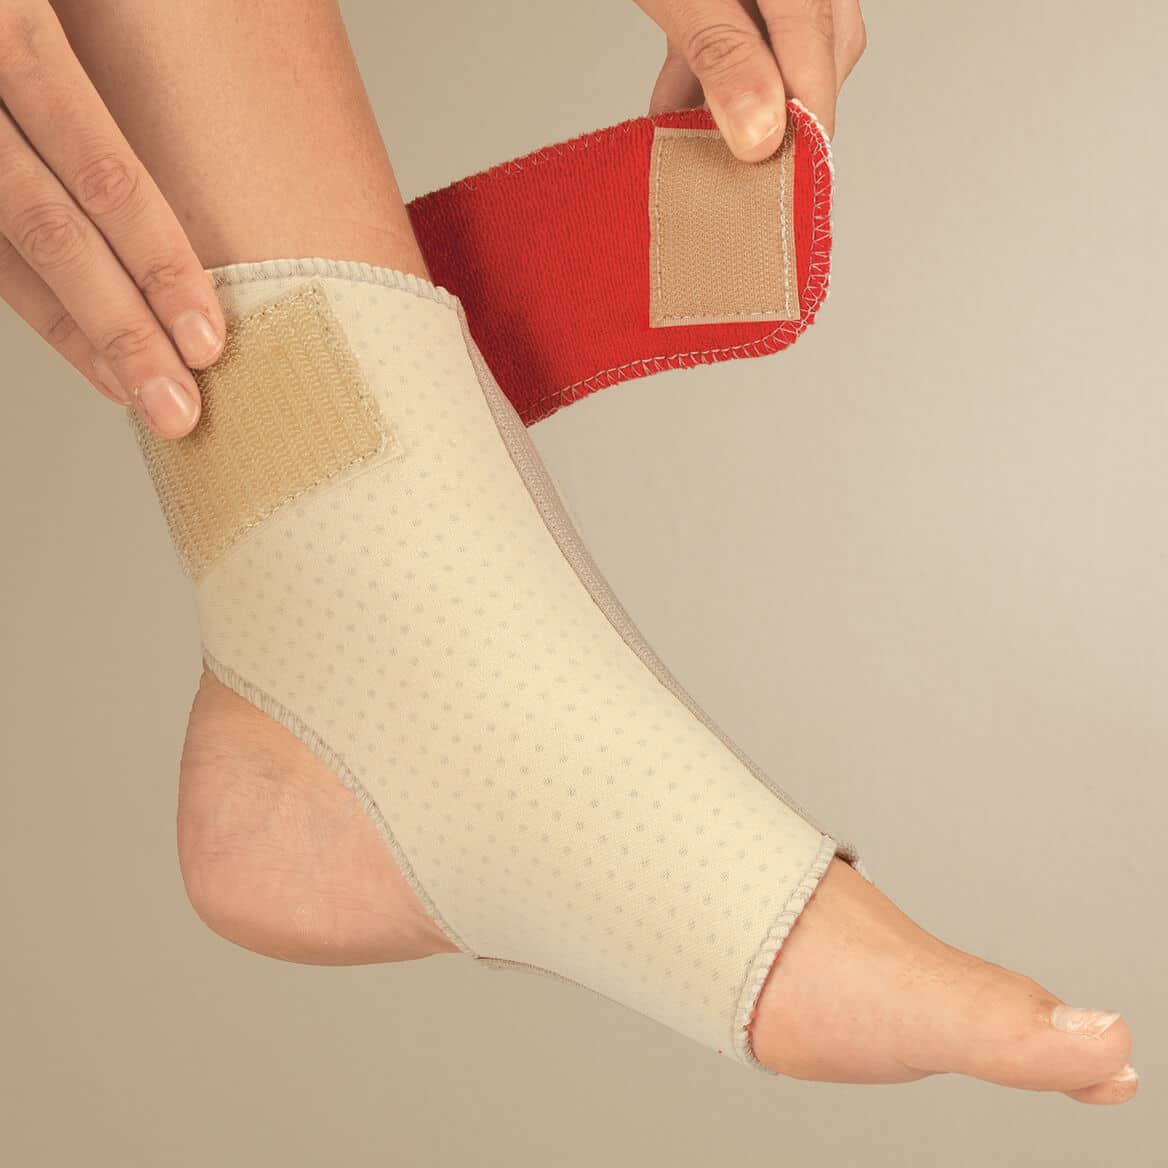 Arthritic Ankle Support